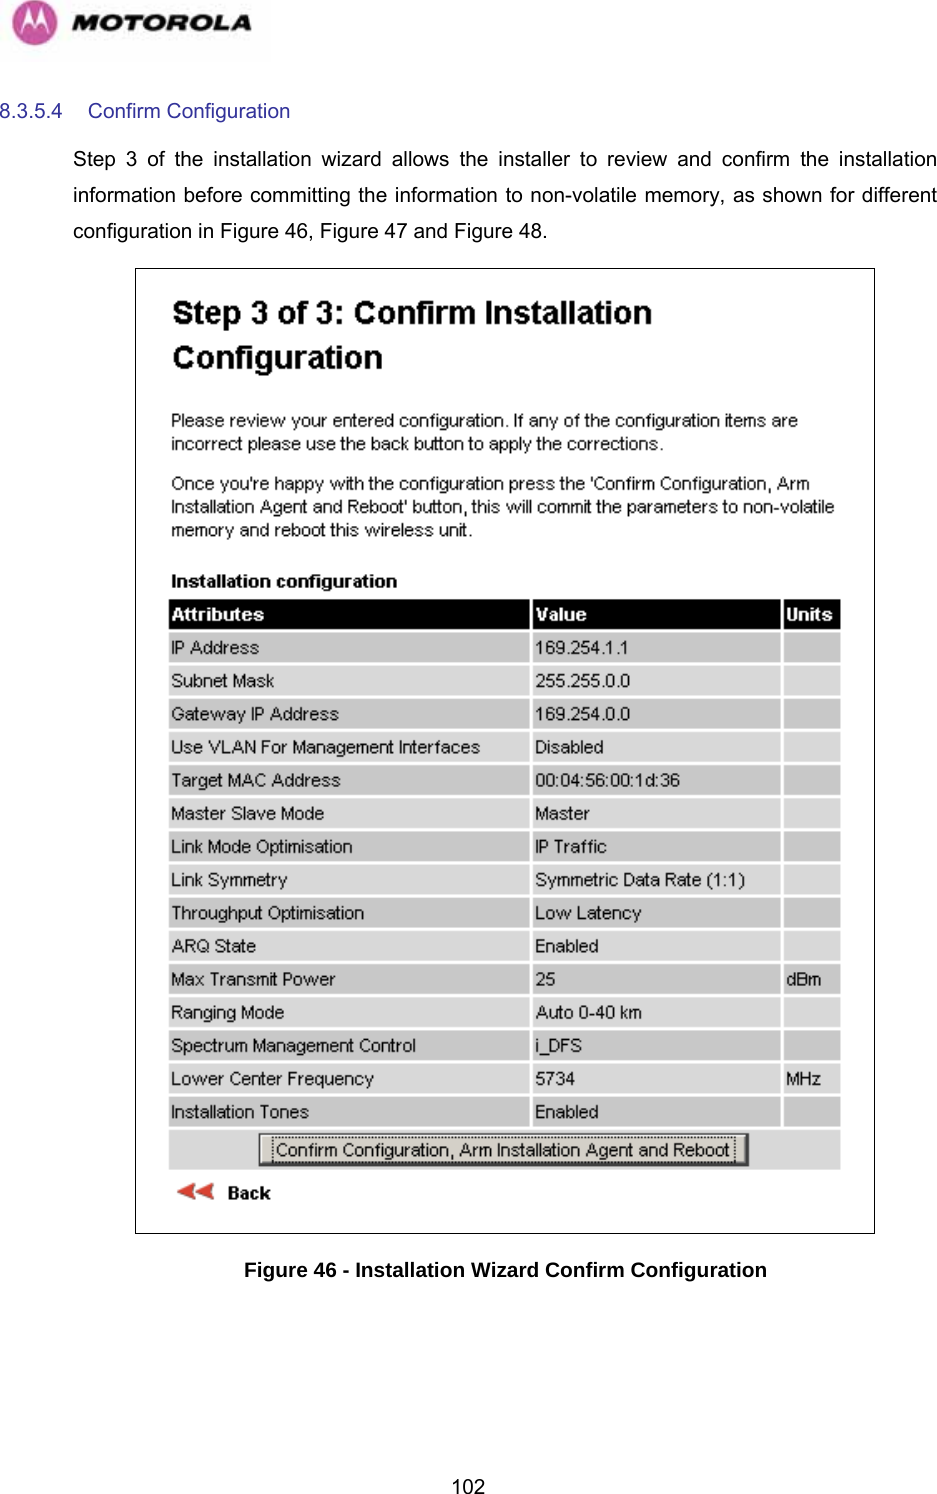   1028.3.5.4  Confirm Configuration  Step 3 of the installation wizard allows the installer to review and confirm the installation information before committing the information to non-volatile memory, as shown for different configuration in Figure 46, Figure 47 and Figure 48.  Figure 46 - Installation Wizard Confirm Configuration  